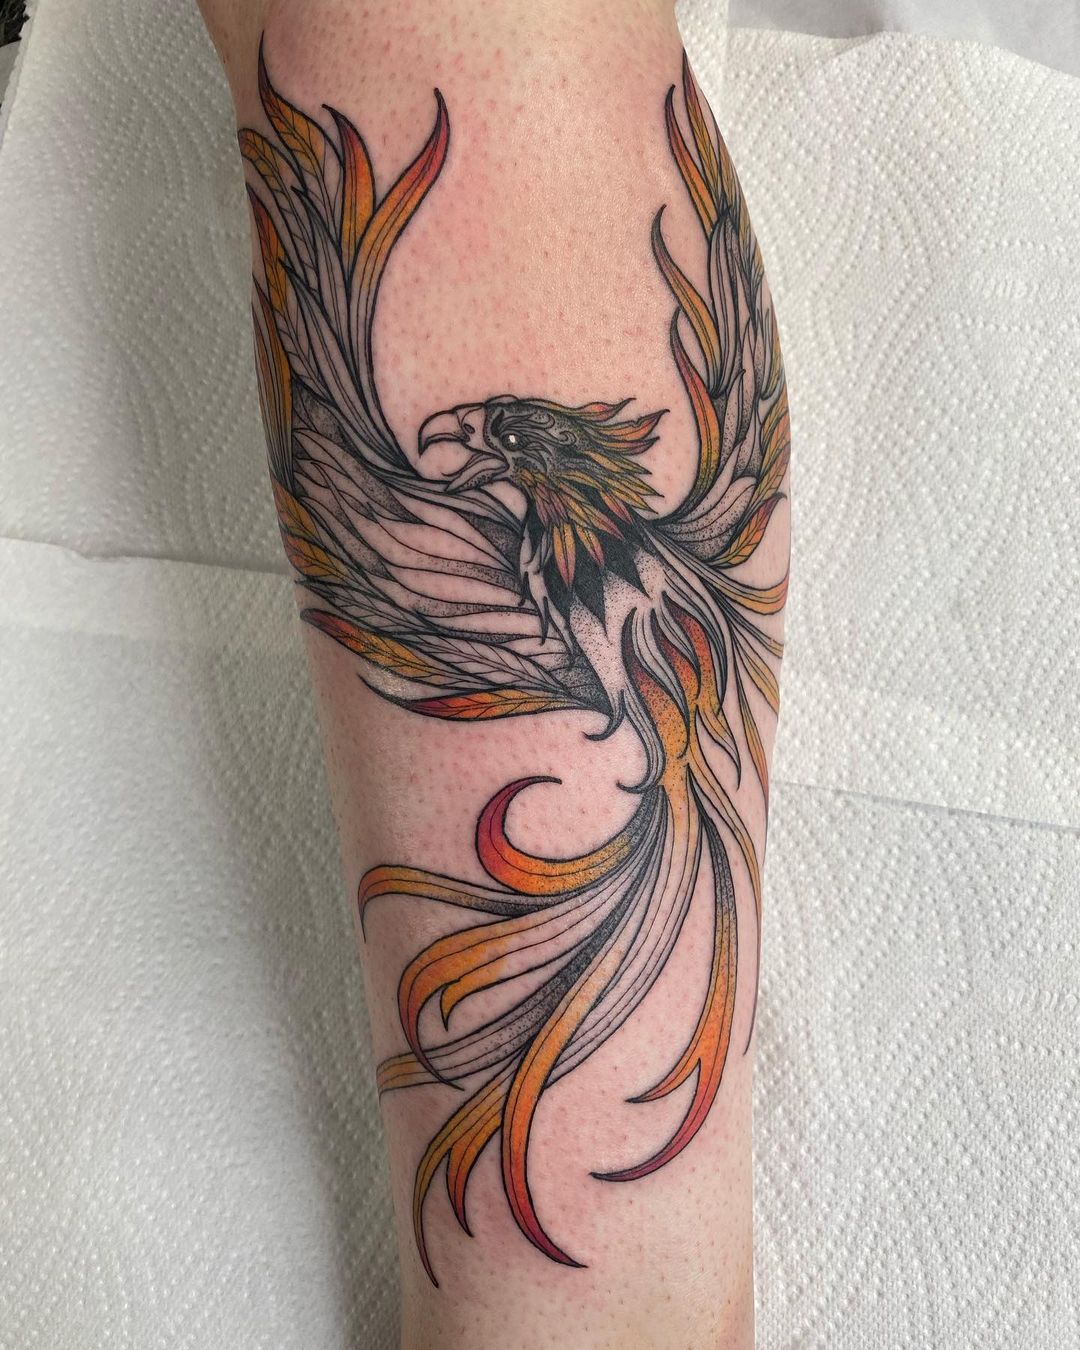 Phoenix Tattoos Designs, Ideas and Meaning | Phoenix tattoo arm, Phoenix  tattoo sleeve, Phoenix tattoo